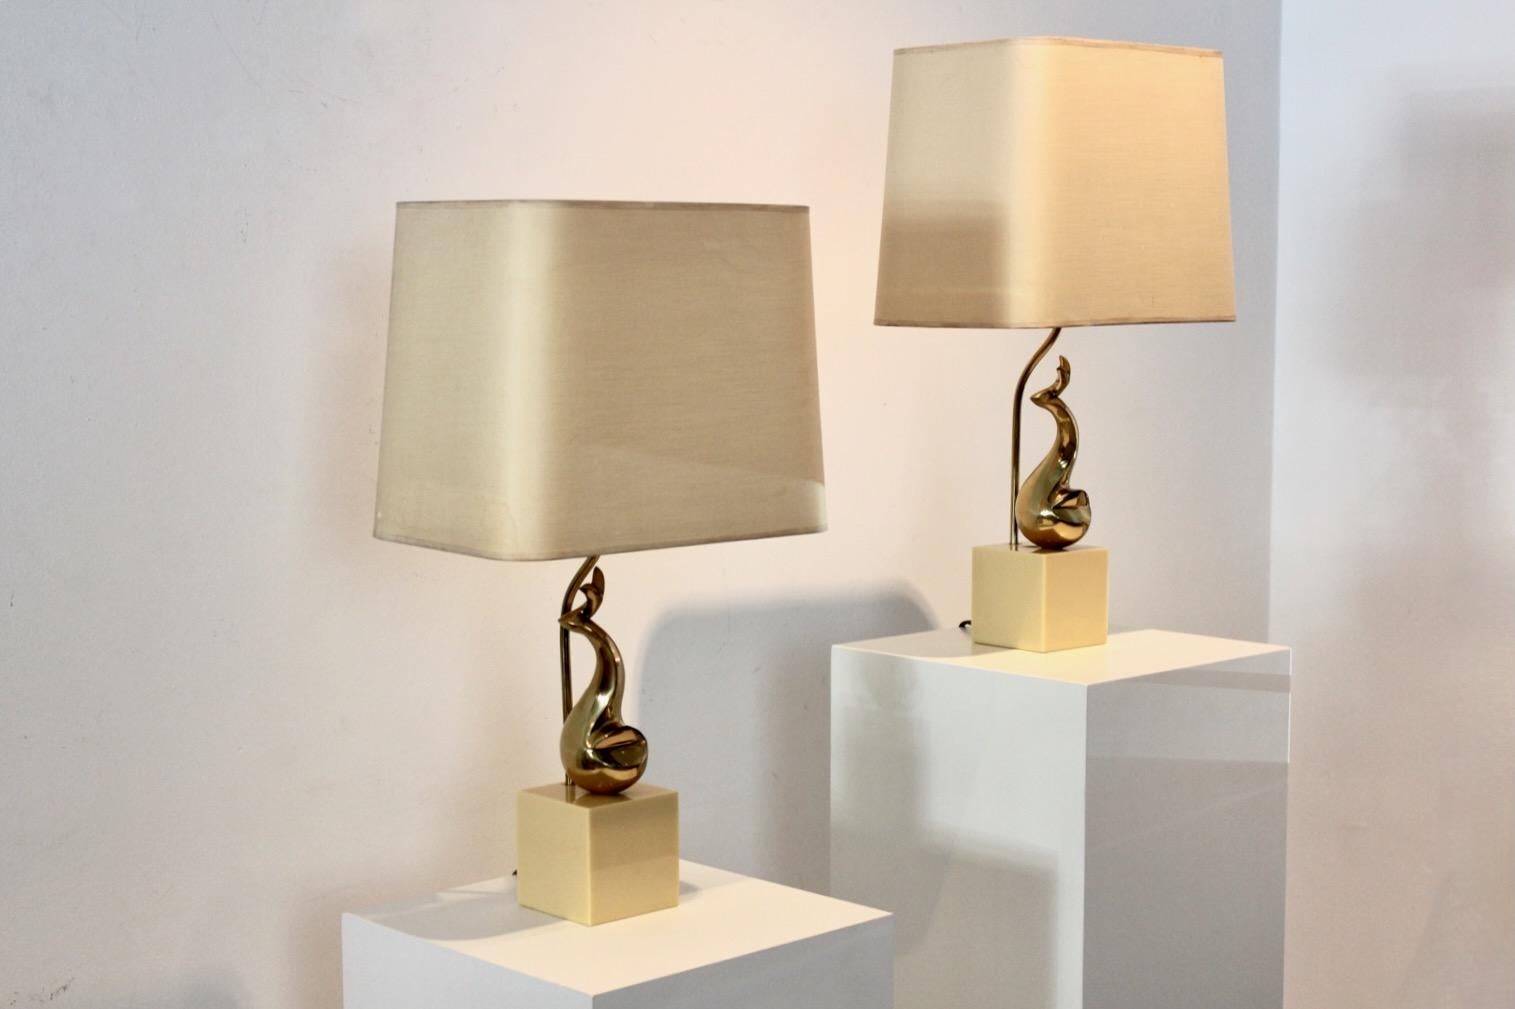 Rare pair of Table lamps by French Artist Philippe-Jean, France, 1970s. These sophisticated midcentury Table Lamps have a fine gilded brass sculpture on a creamy-marble foot with the original shades. Normal wear on the shades due to age and use. The